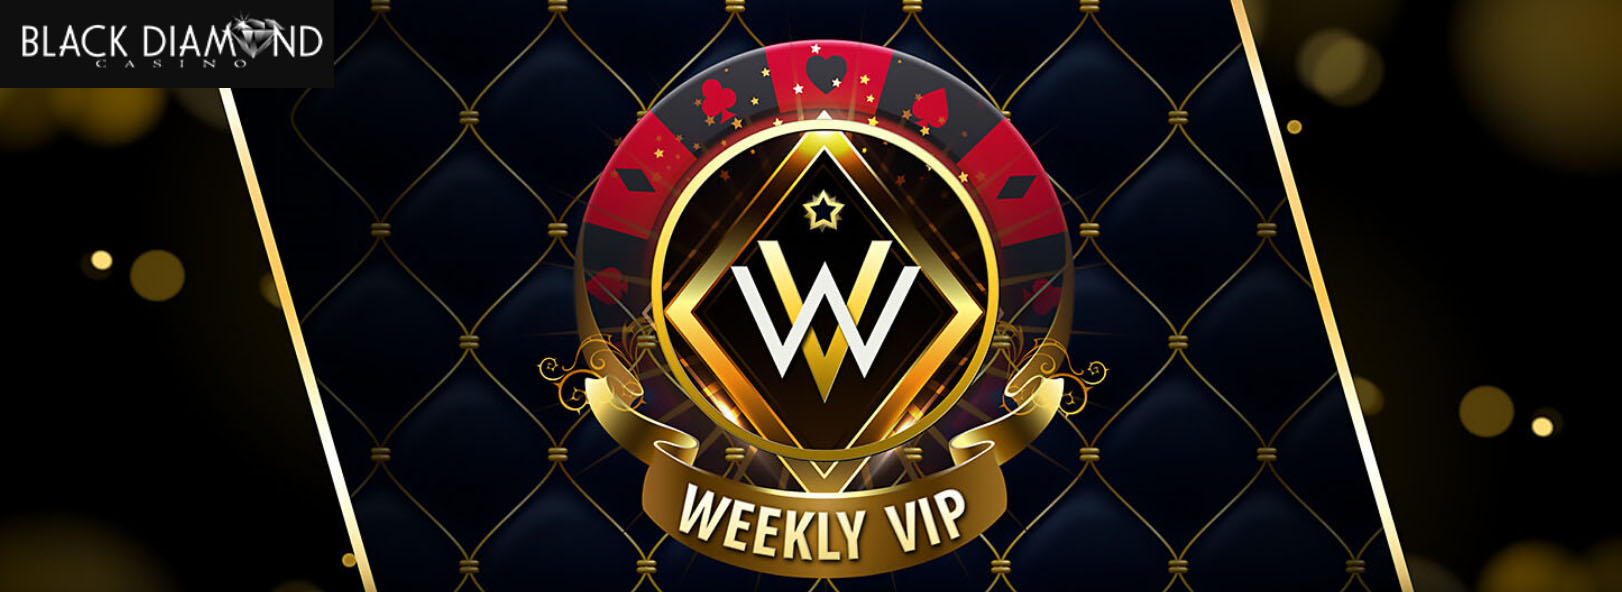 Play in the Weekly VIP Tournaments for Big Cash Prizes at Black Diamond Casino